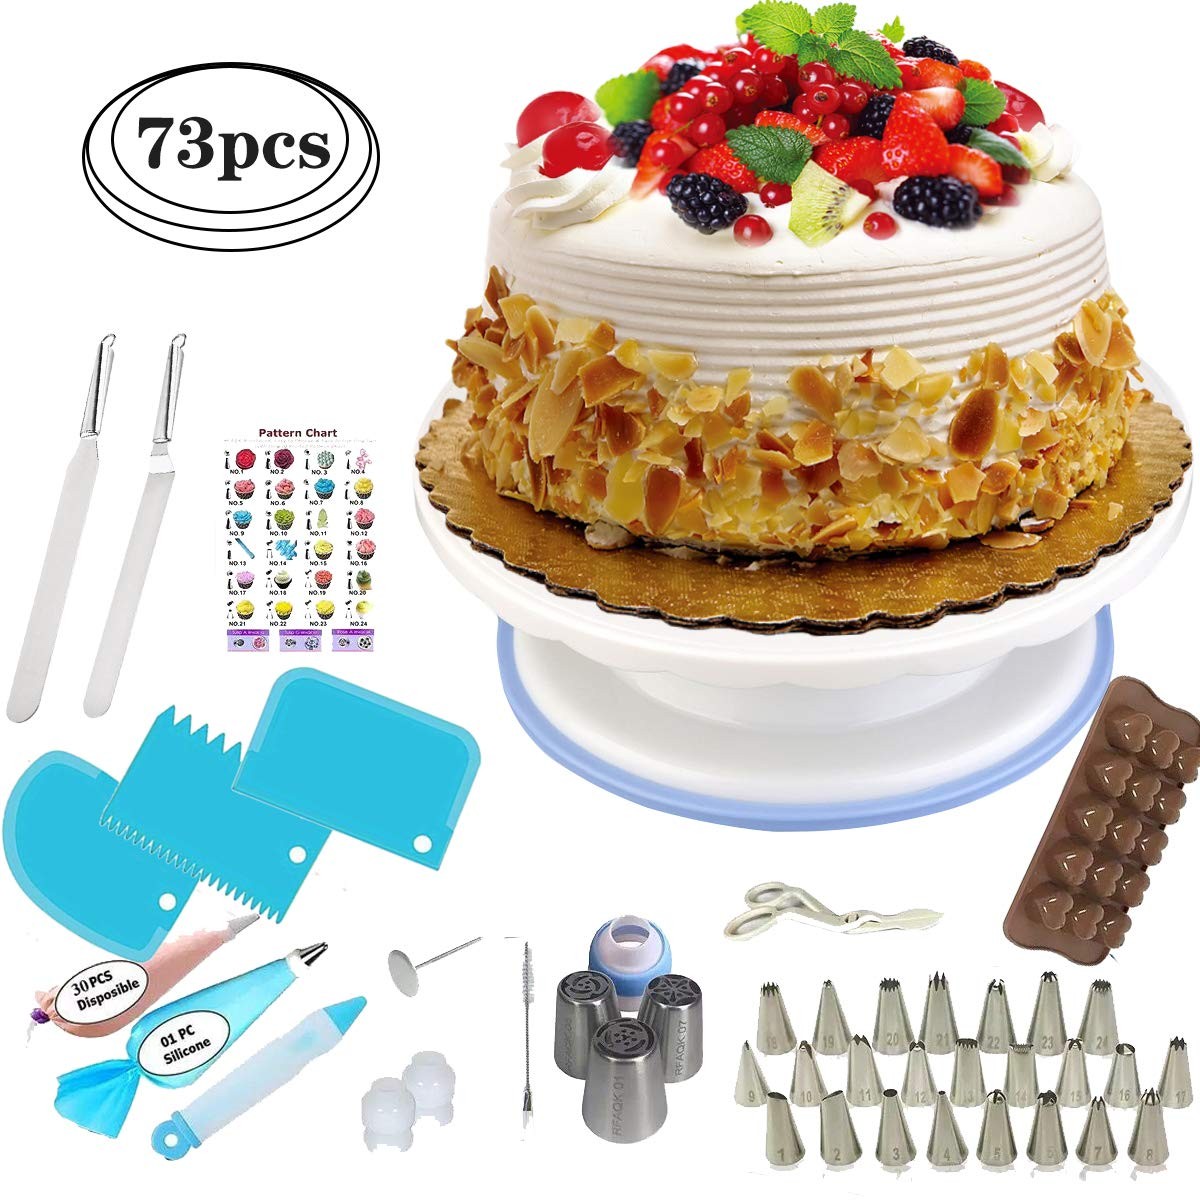 DIY Cake Decorating Supplies Kit, 73pcs Cake Decorating Supplies with Turntable More Stable